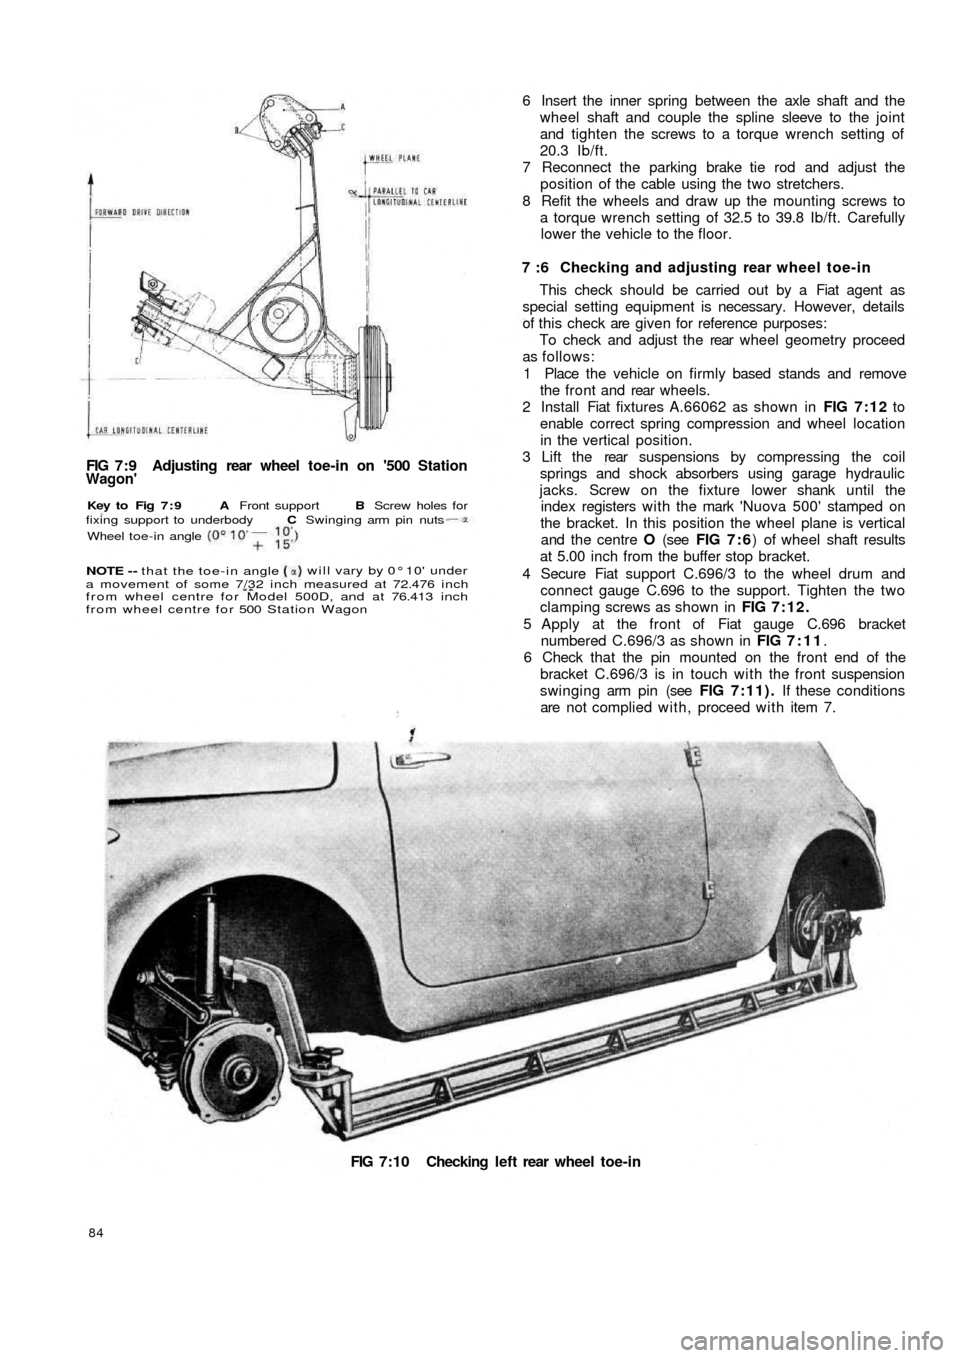 FIAT 500 1960 1.G Workshop Manual FIG 7:9  Adjusting  rear  wheel toe-in on 500 StationWagon
FIG 7:10 Checking left rear wheel toe-in
84
6 Insert the inner spring between the axle shaft and the
wheel shaft and couple the spline slee